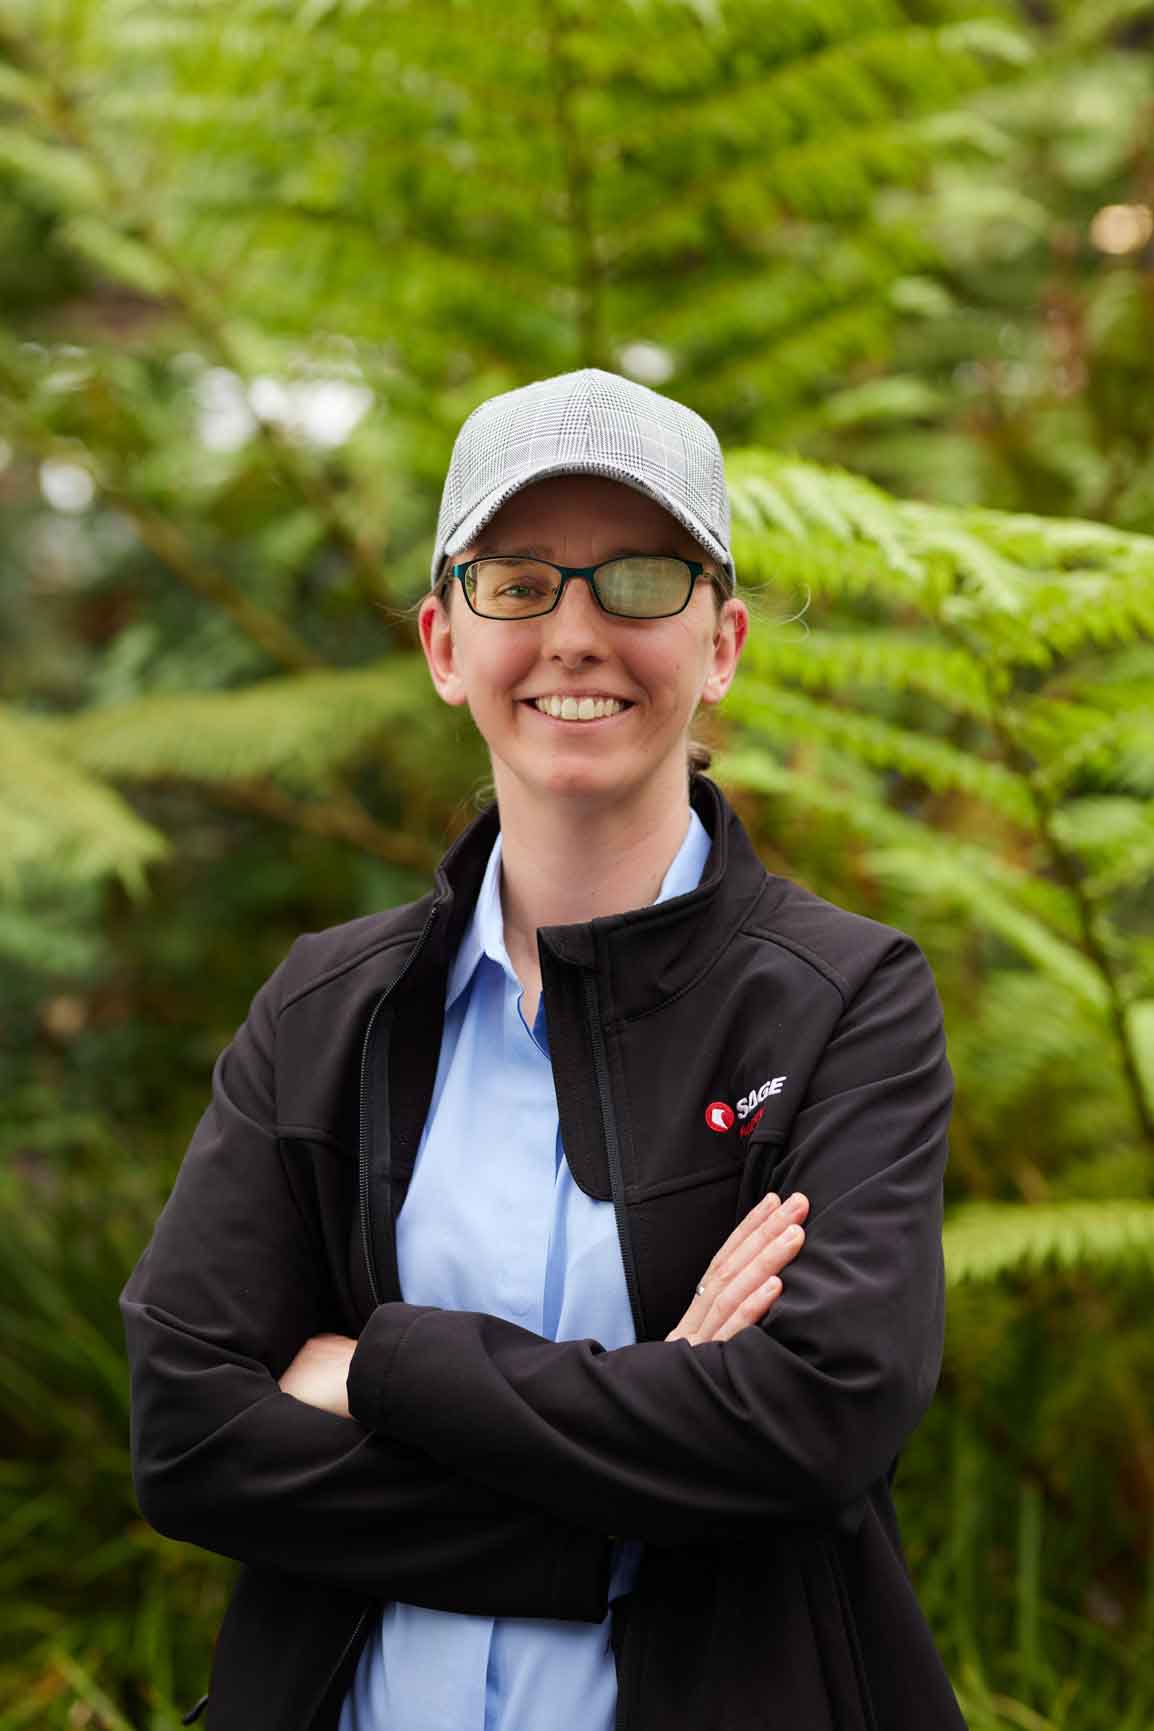 Cassie Hames is wearing a cap and black jacket saying Sage Automation with her arms folded with a content smile on her face standing in front of Green plants.